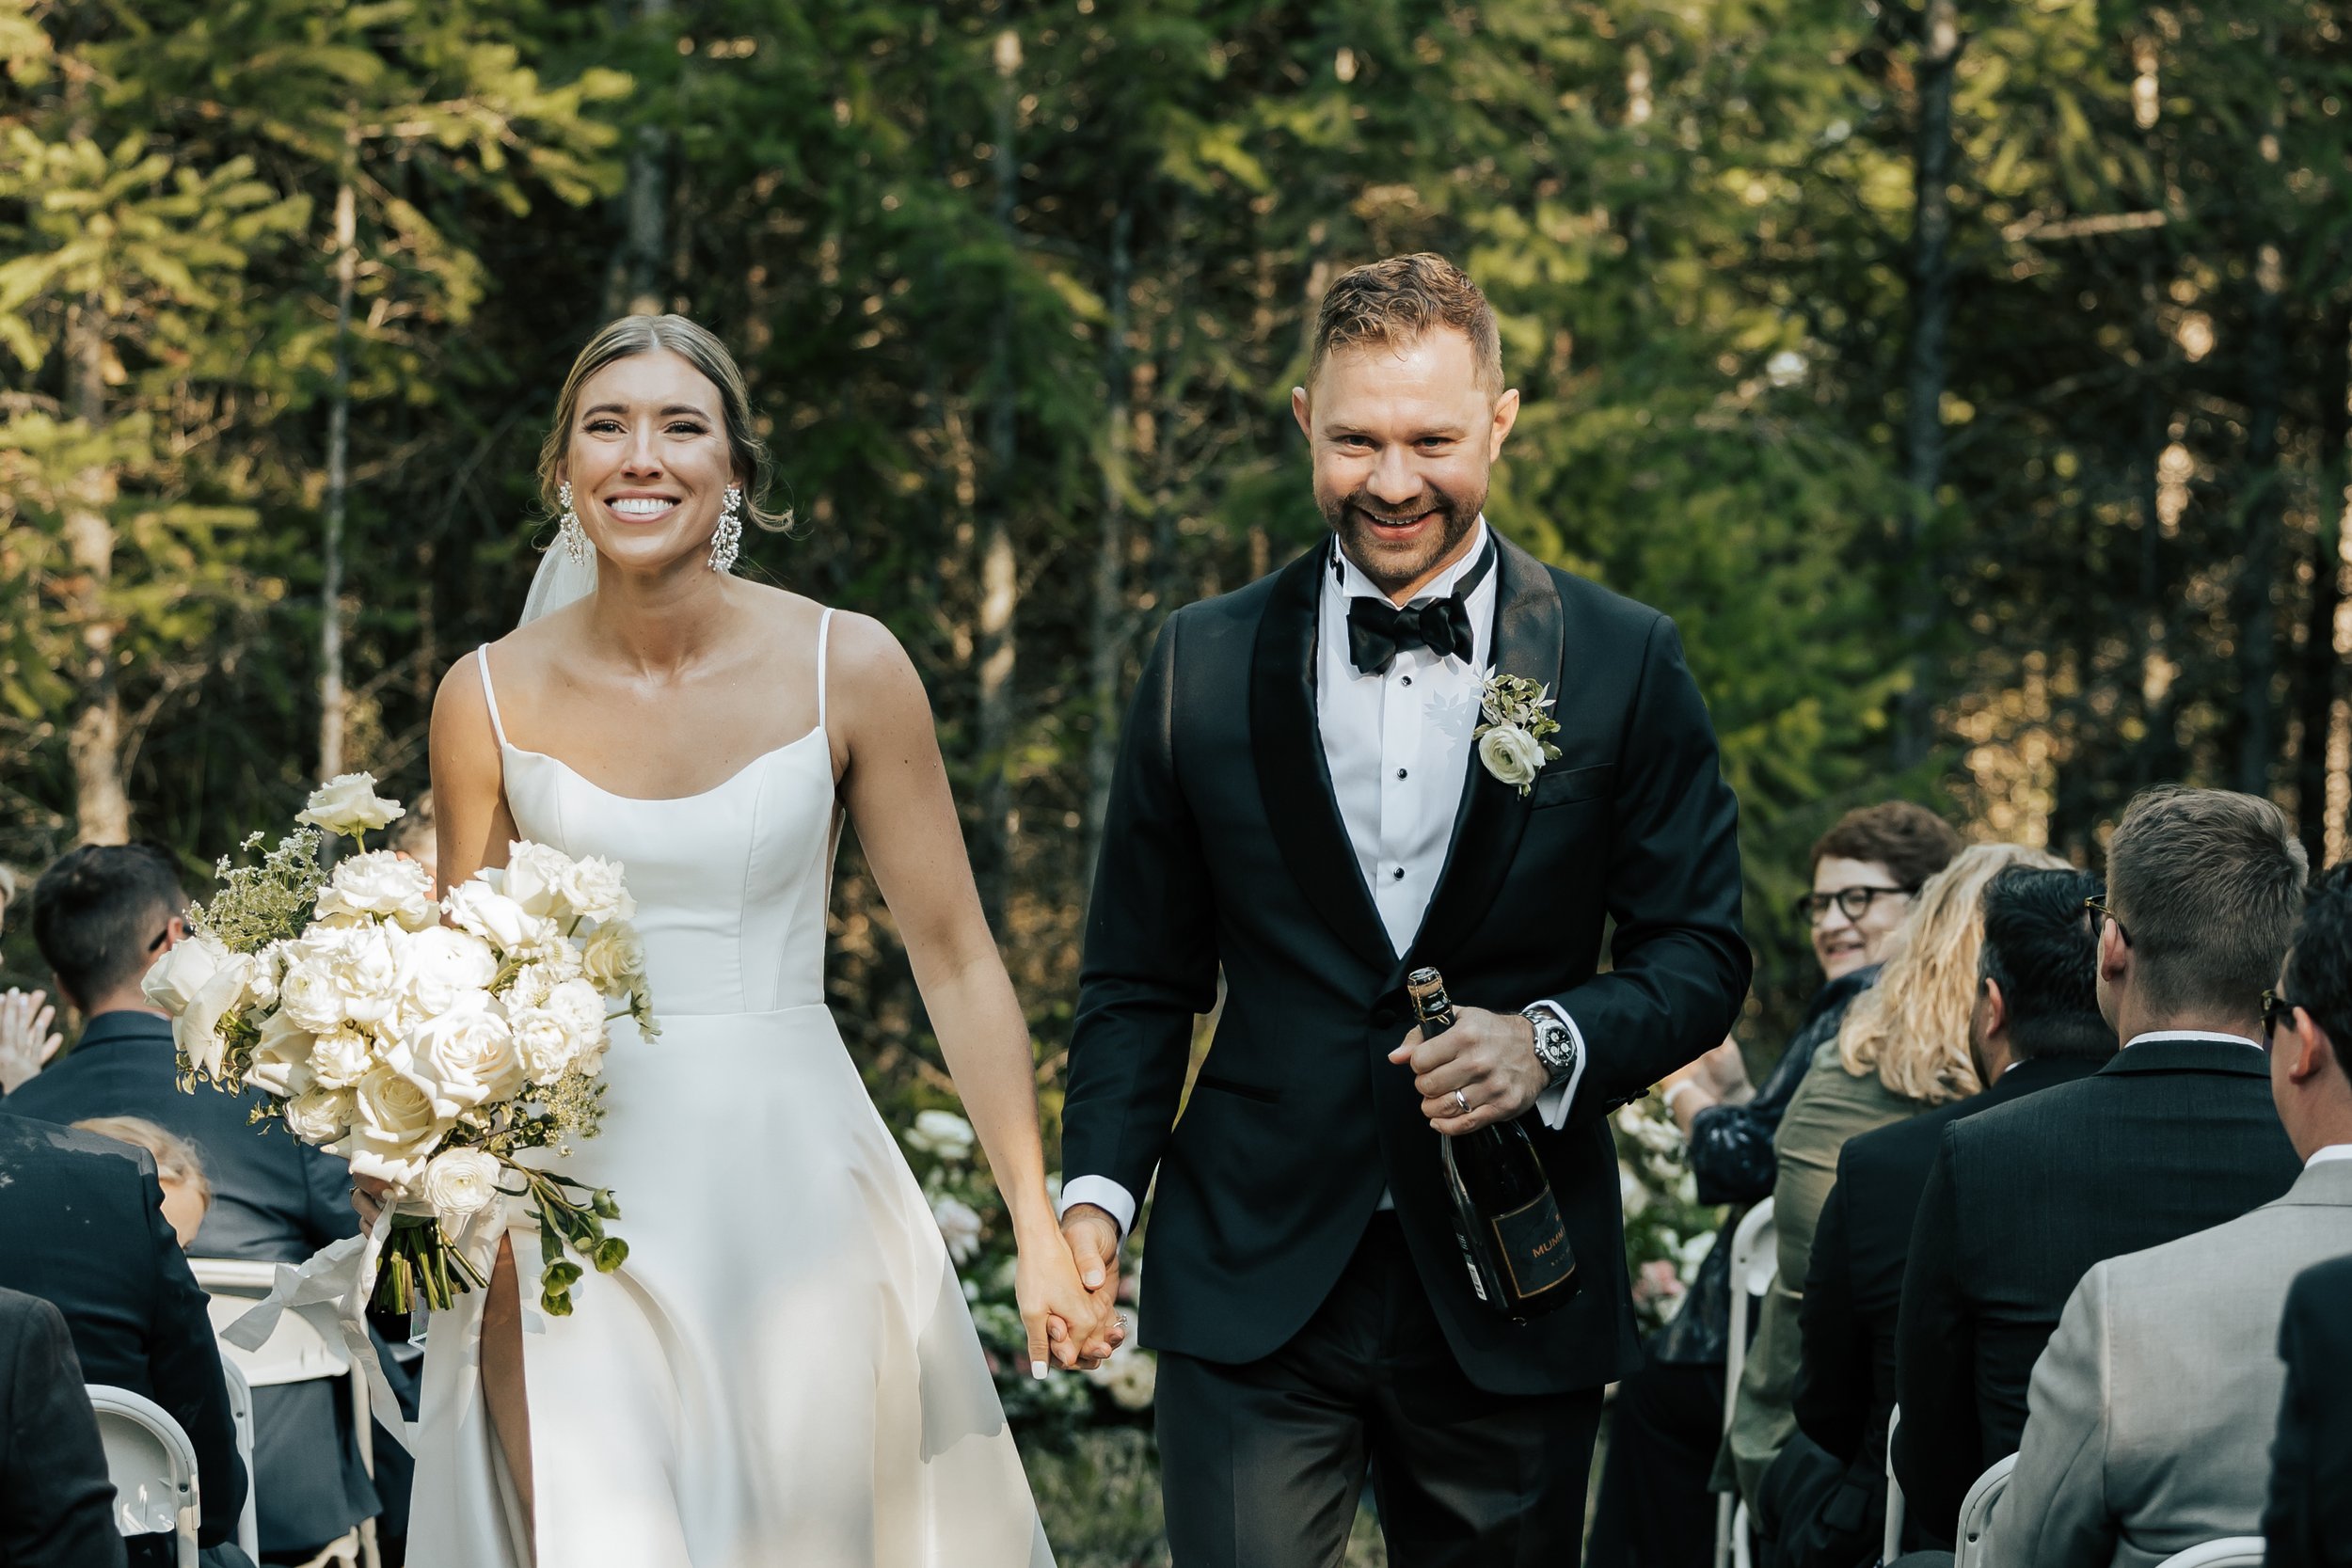  Bride and groom walk down the aisle together after getting married. Wedding ceremony in the forest in Whitefish, Montana. Wedding inspo. Bride is wearing gorgeous large white earrings with a strappy wedding dress and veil and groom is wearing a blac